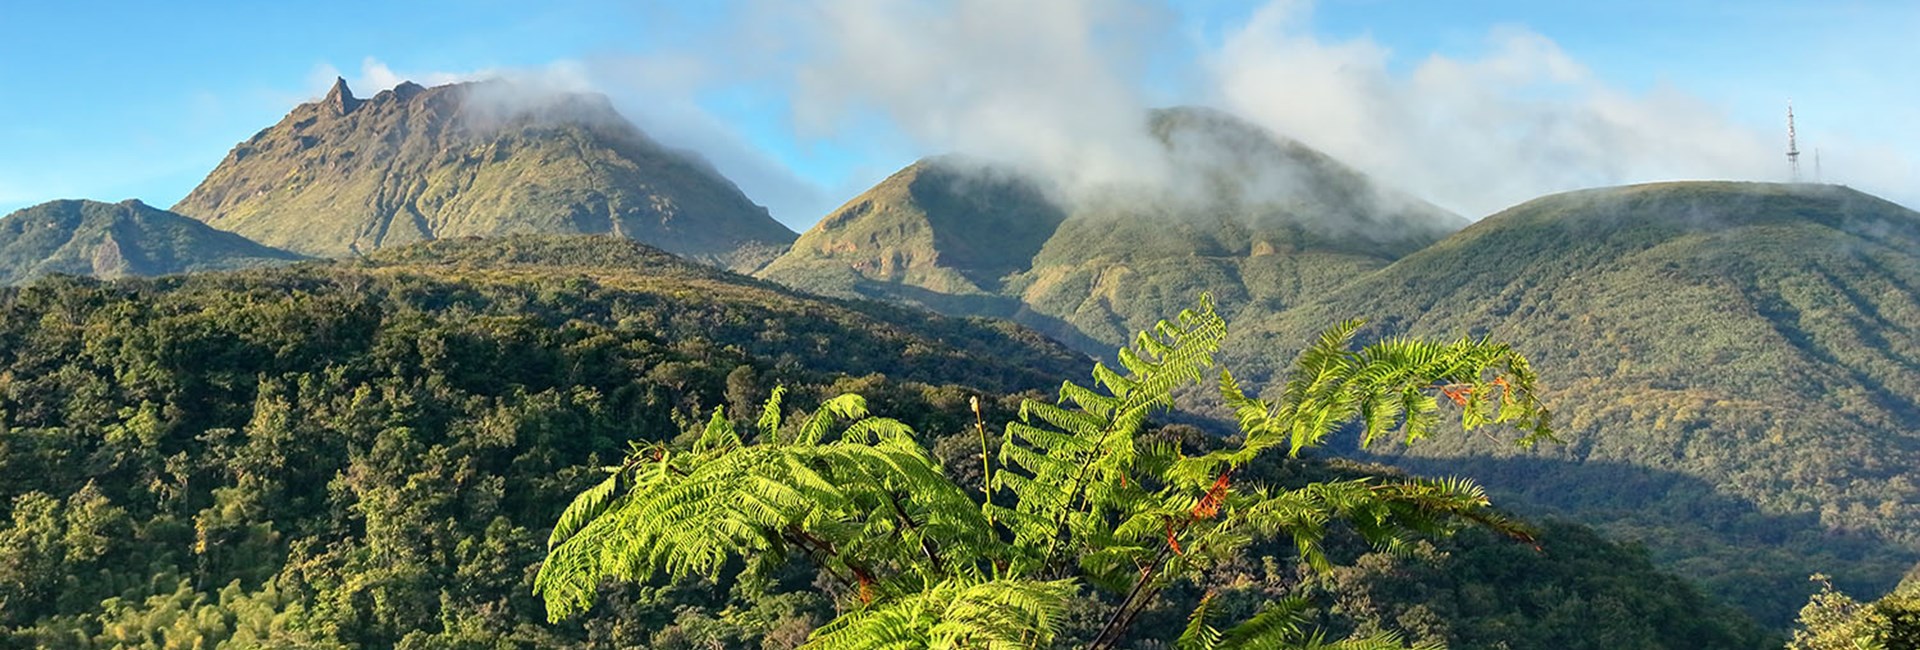 Tree covered peaks of Soufriere Volcano